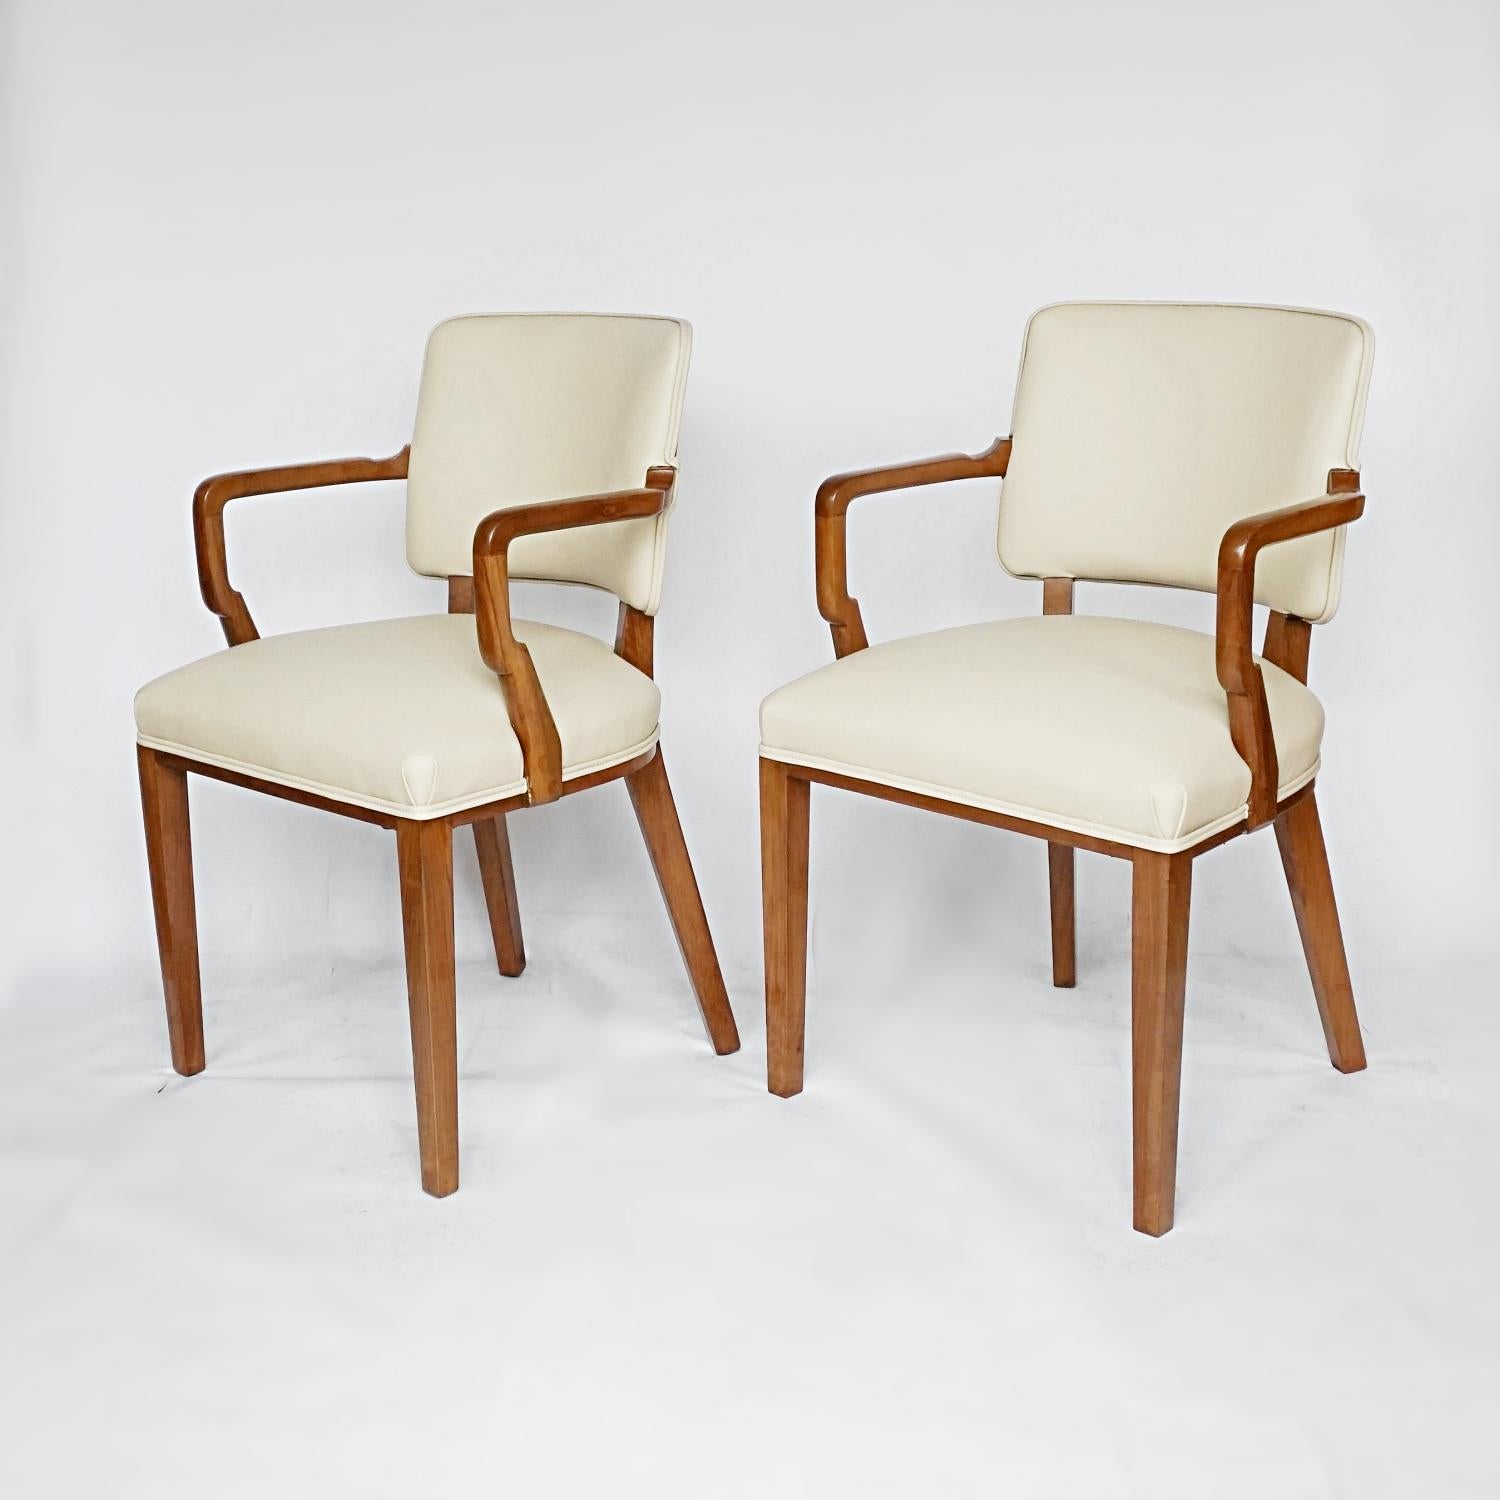 Pair of Art Deco Desk Chairs by Heal's of London Circa 1935 English 1